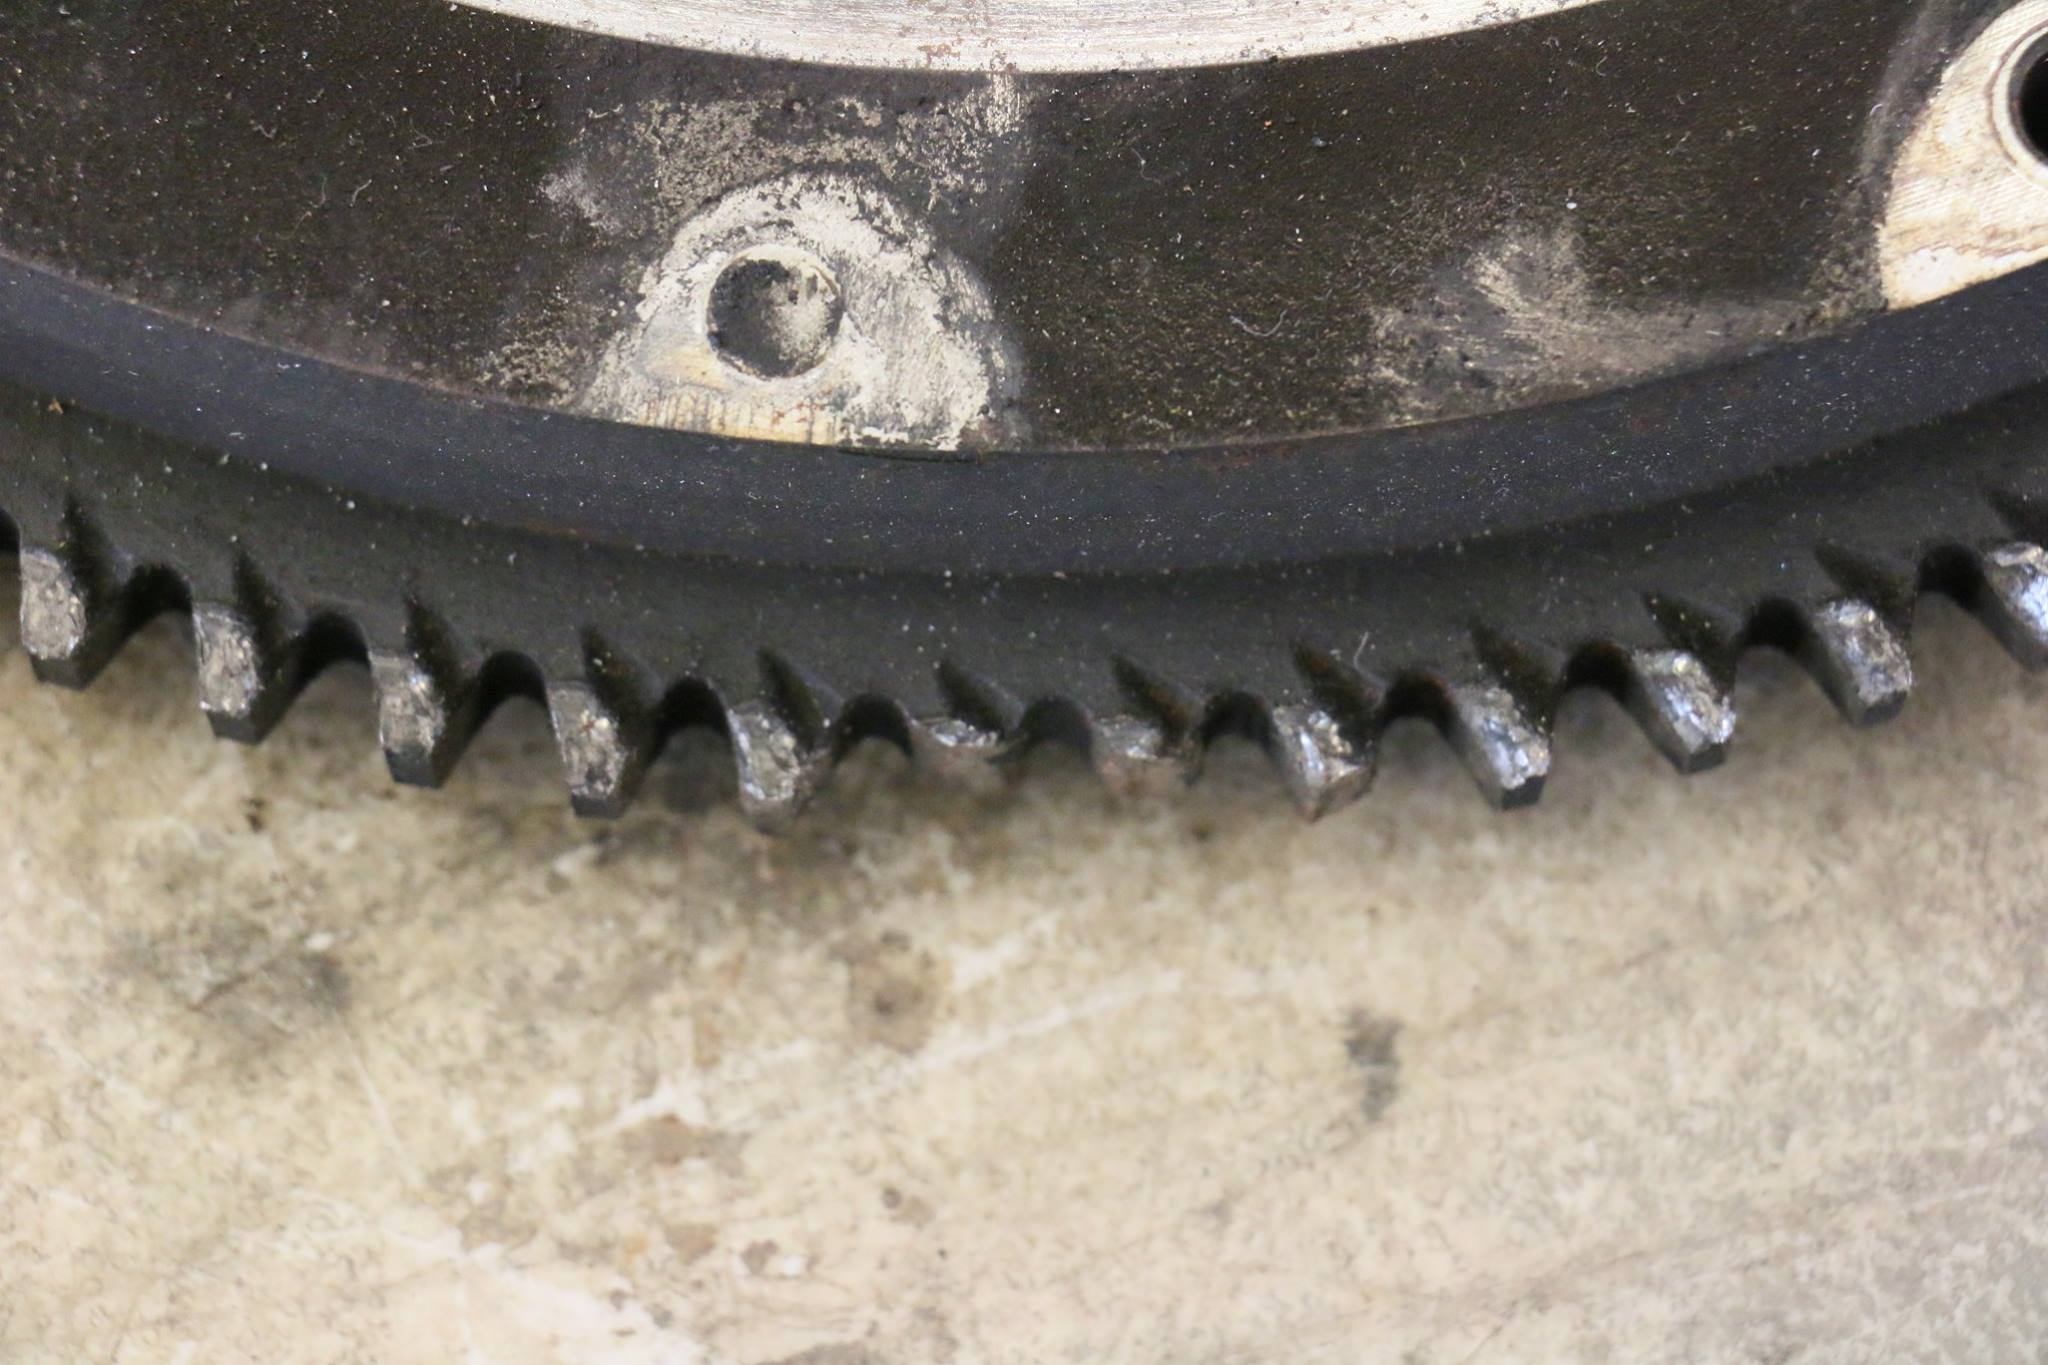 This caused damage to the flywheel gear. Two of the teeth are broken off.